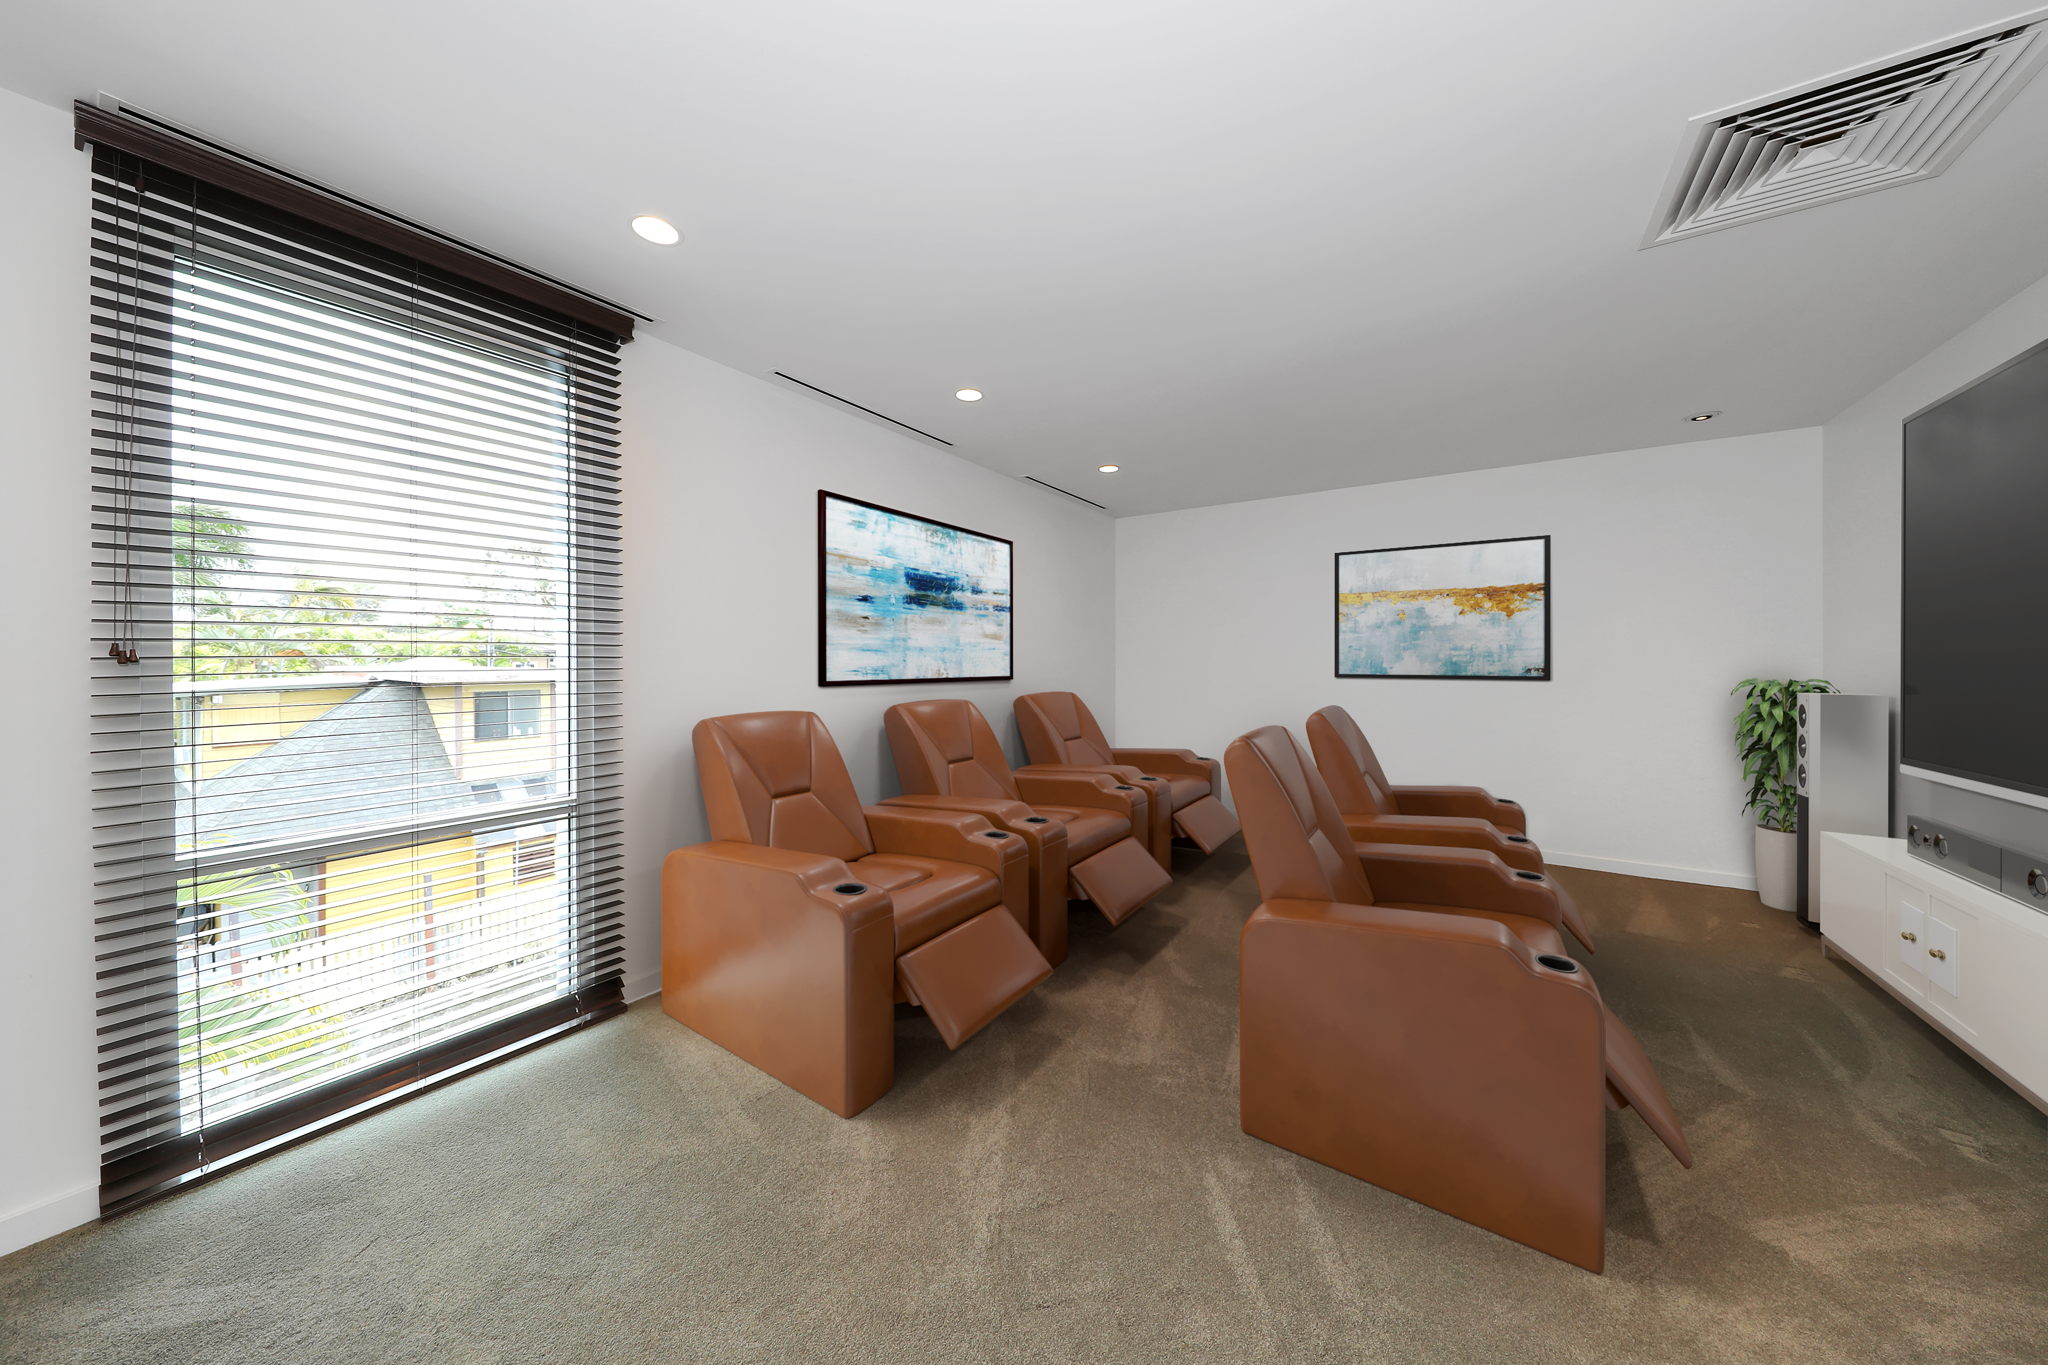 Home theater room with separate air conditioning control